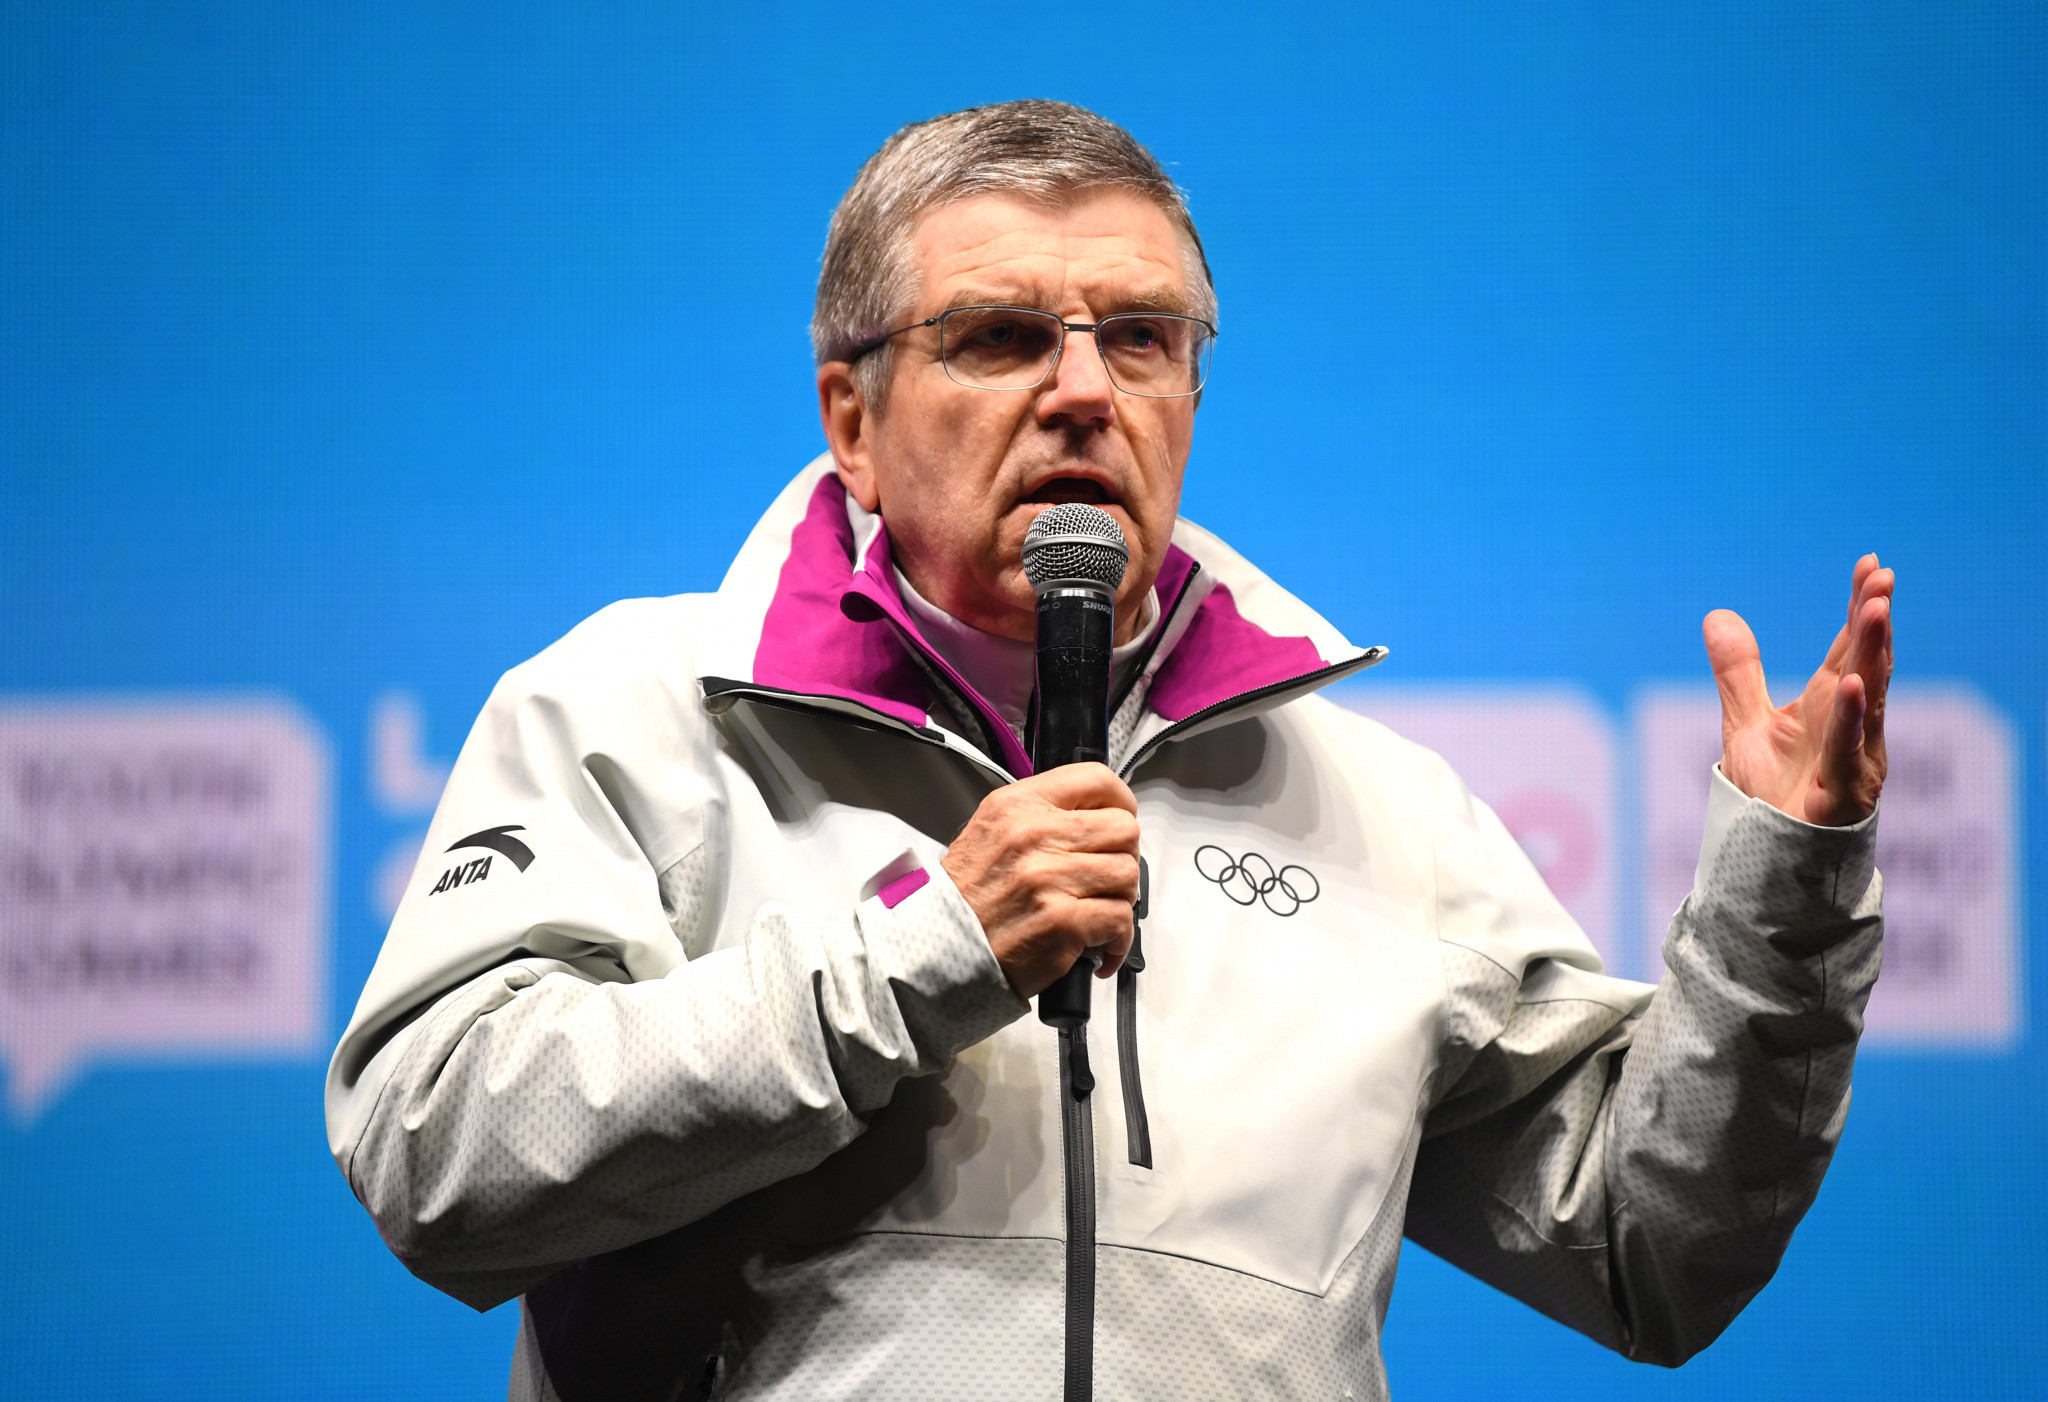 Thomas Bach has claimed the IOC is fully committed to the success of Tokyo 2020 ©Getty Images